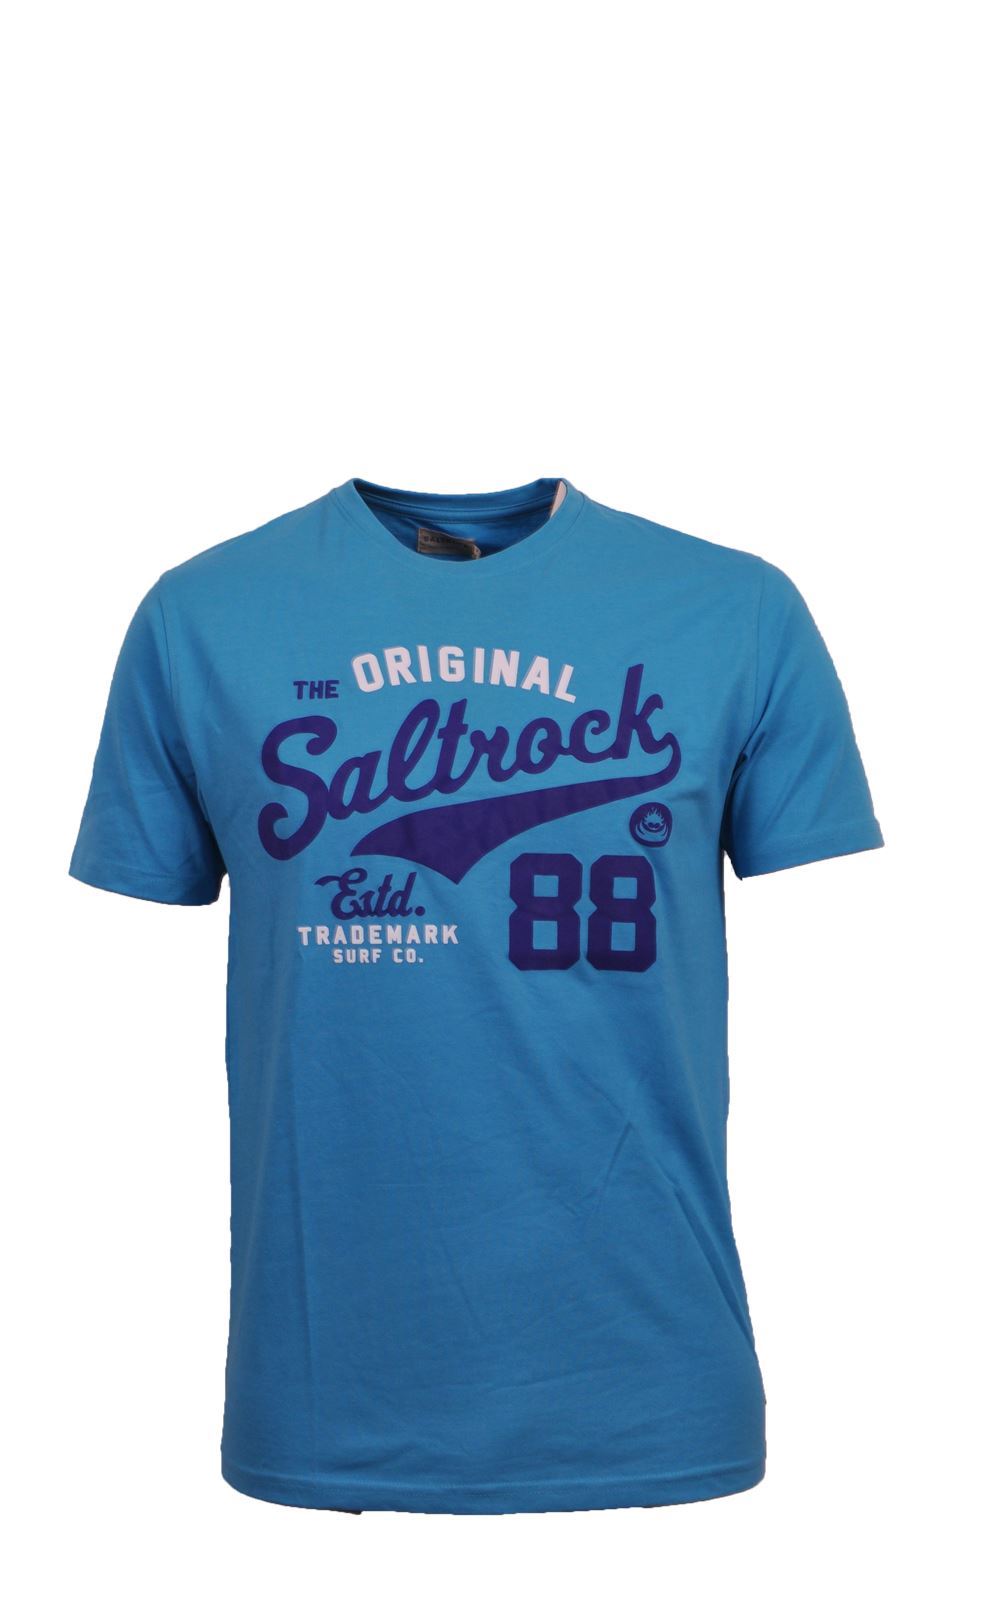 Picture of Saltrock T-Shirt 11901096